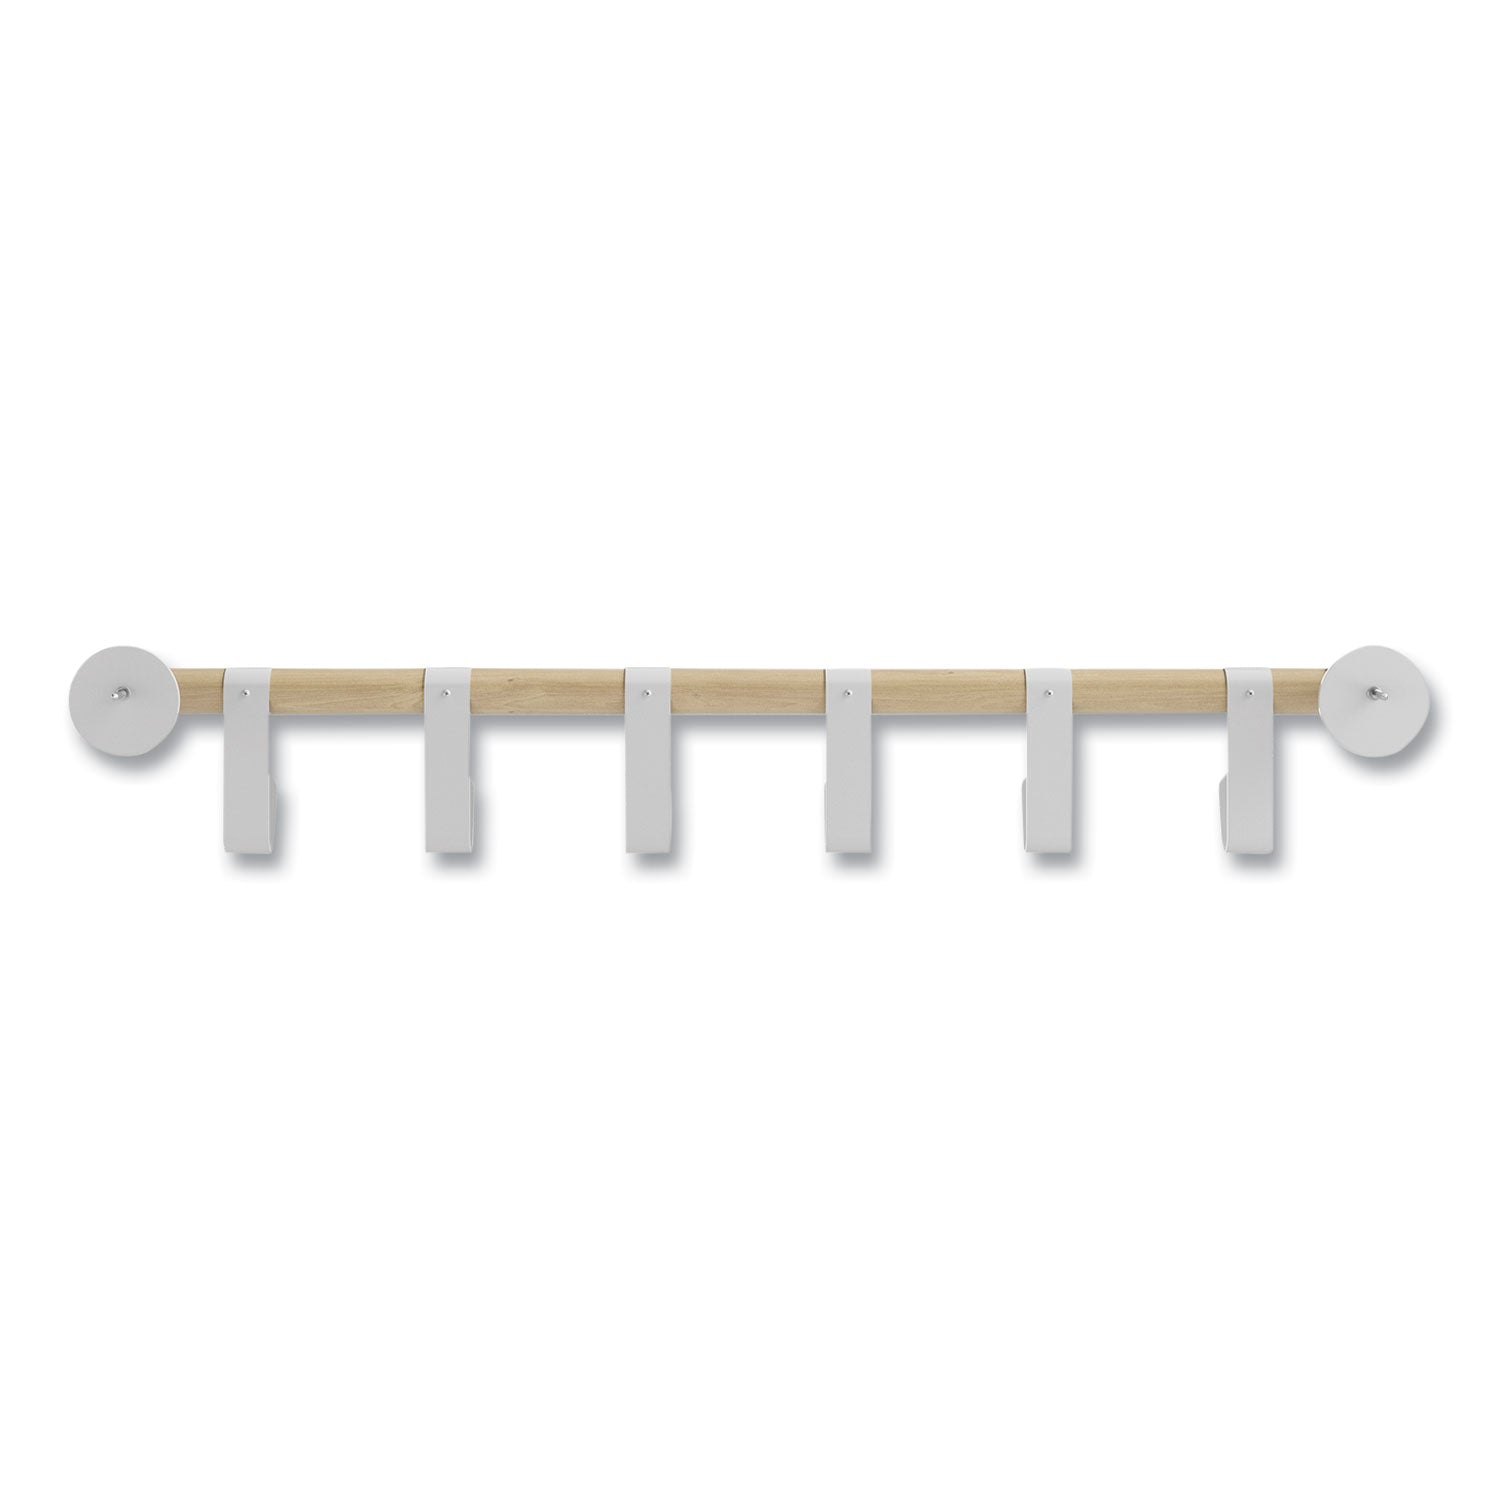 resi-coat-wall-rack-6-hook-3625w-x-425d-x-6h-white-ships-in-1-3-business-days_saf4264wh - 3